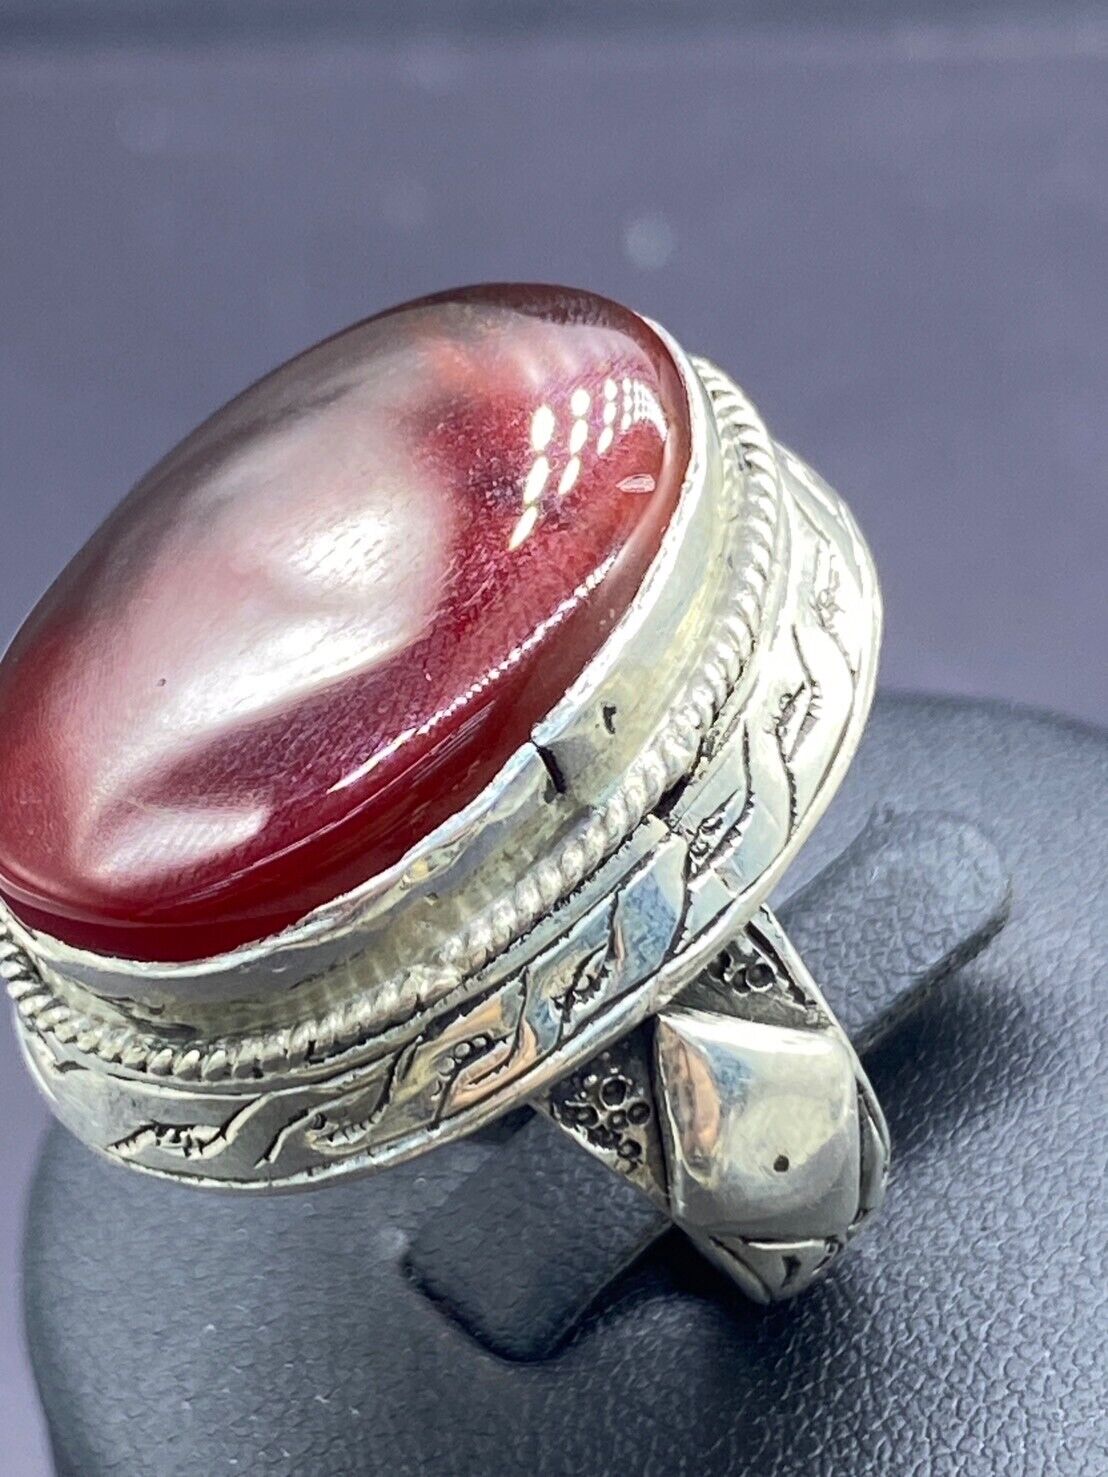 Rare Authentic Old Natural Yemeni Agate Solid Sliver Ring With Engraved